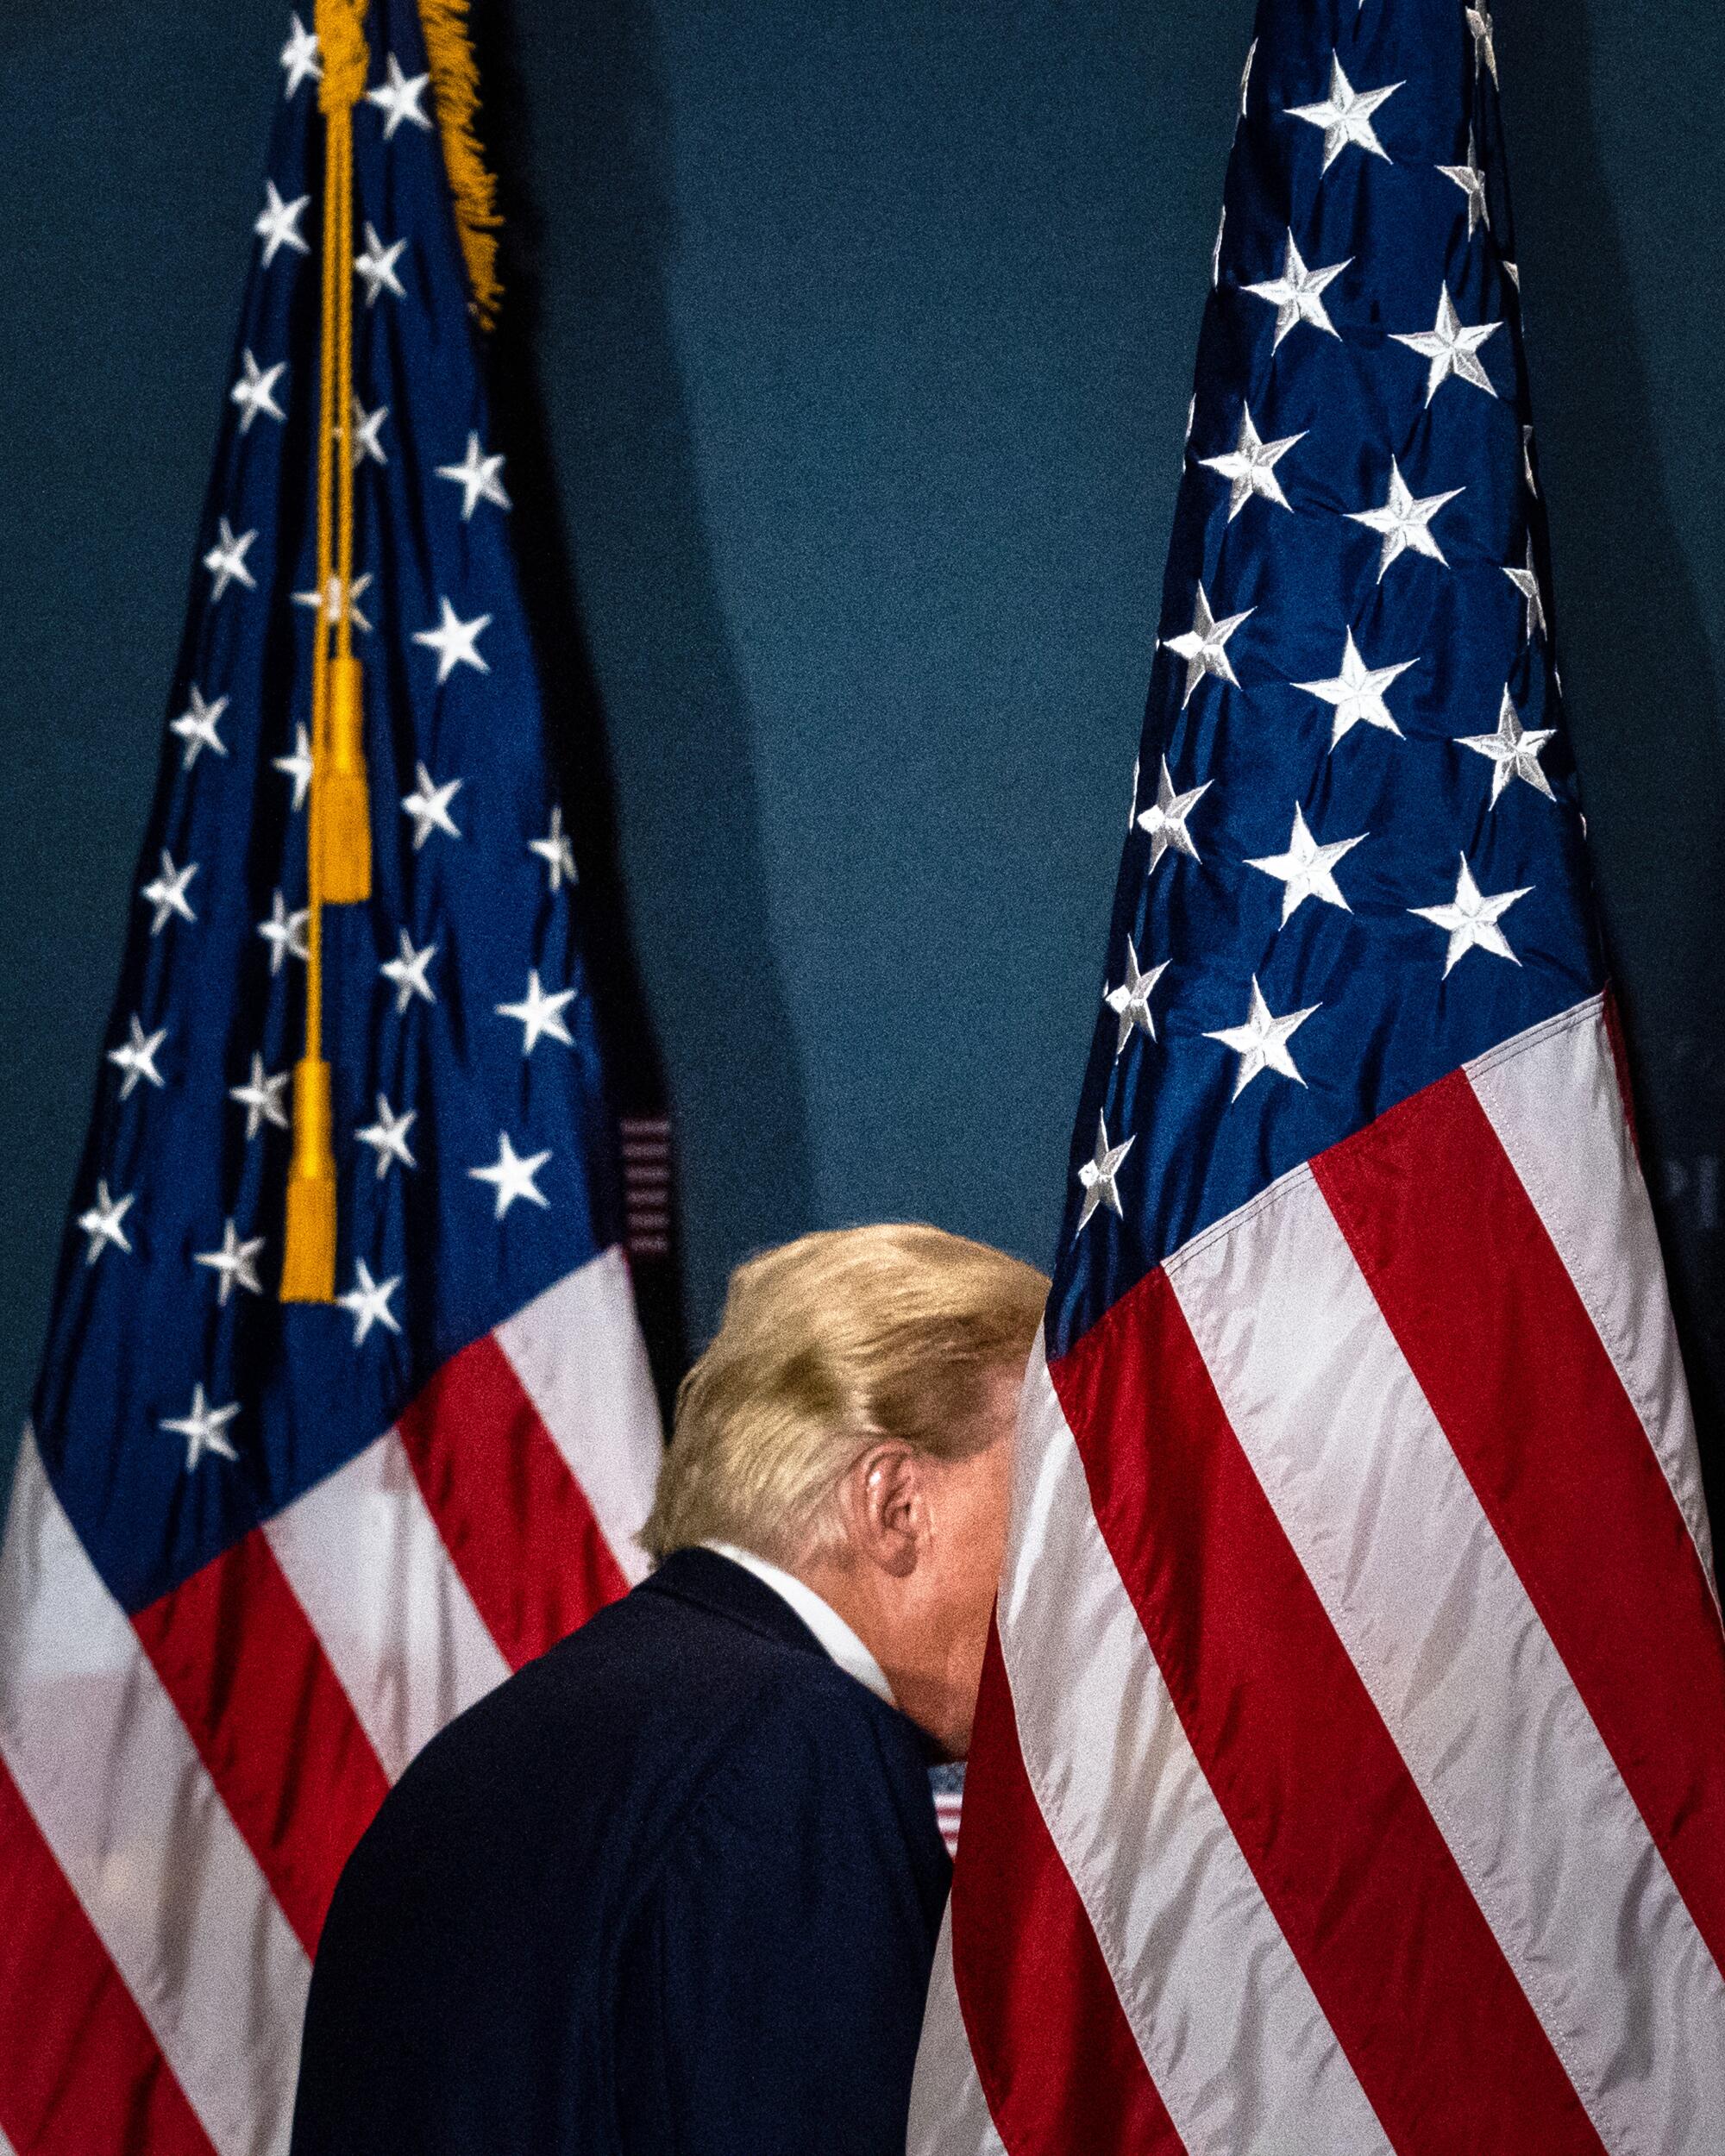 A vertical frame of Donald Trump walking in between two American flags - his face obstructed by the flag at right.